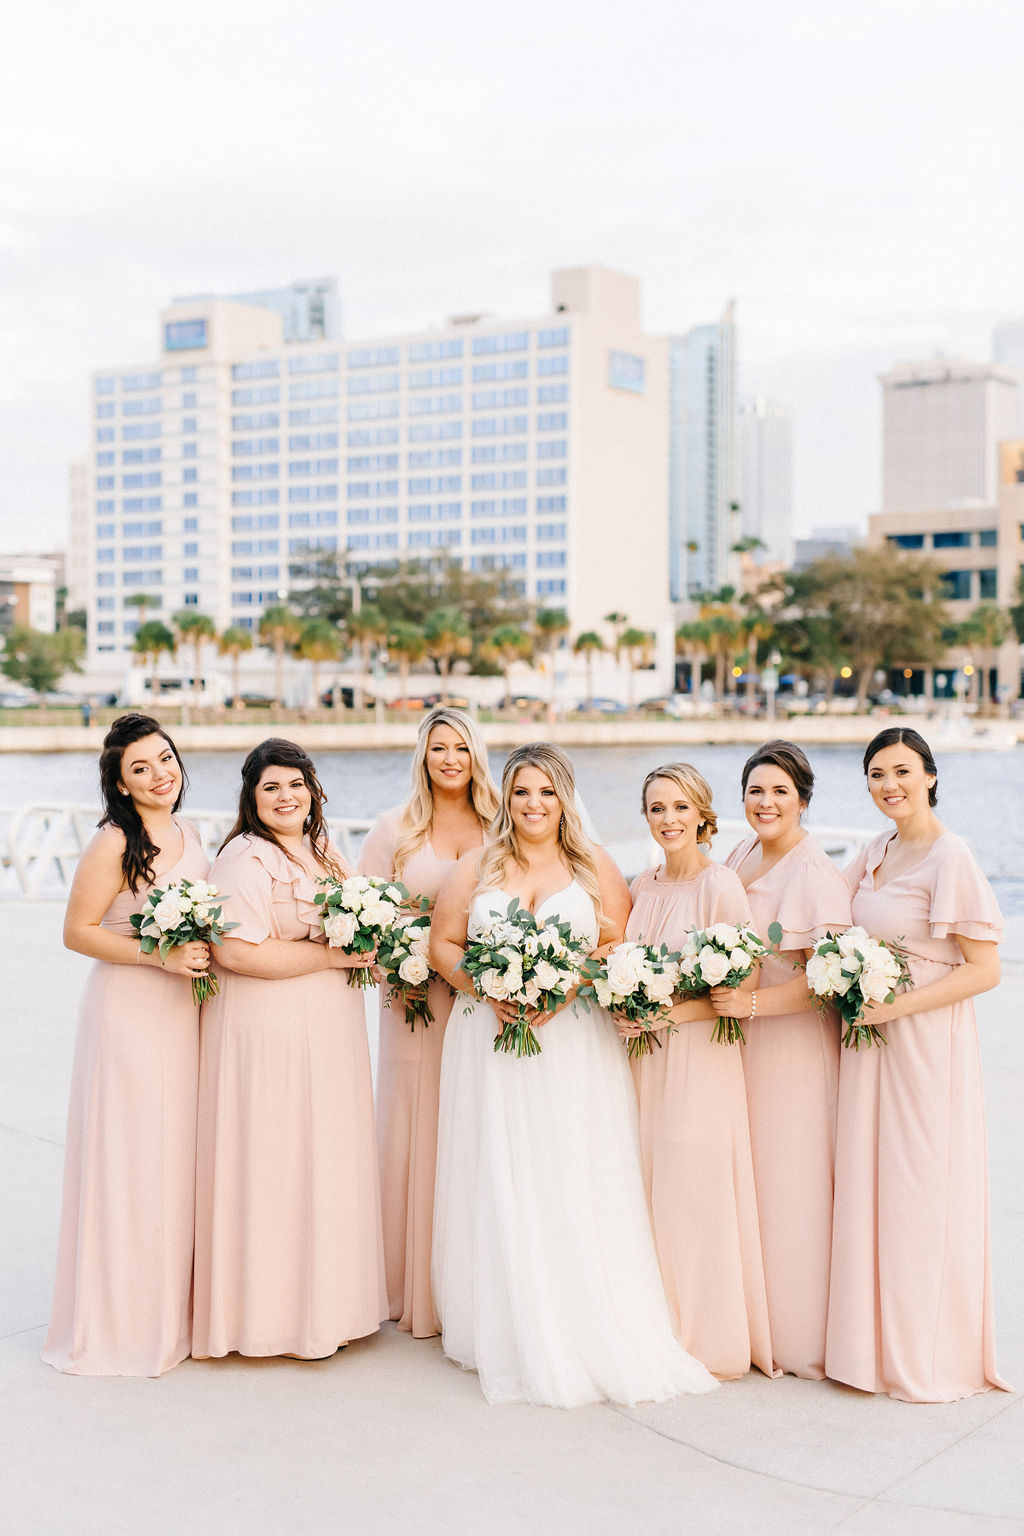 Florida Bridal Party with Downtown Tampa Backdrop, Bridesmaids in Mix and Match Blush Pink Show Me Your Mumu Bridesmaids Dresses, Holding White and Green Floral Bouquets| Tampa Bay Wedding Planner UNIQUE Weddings and Events